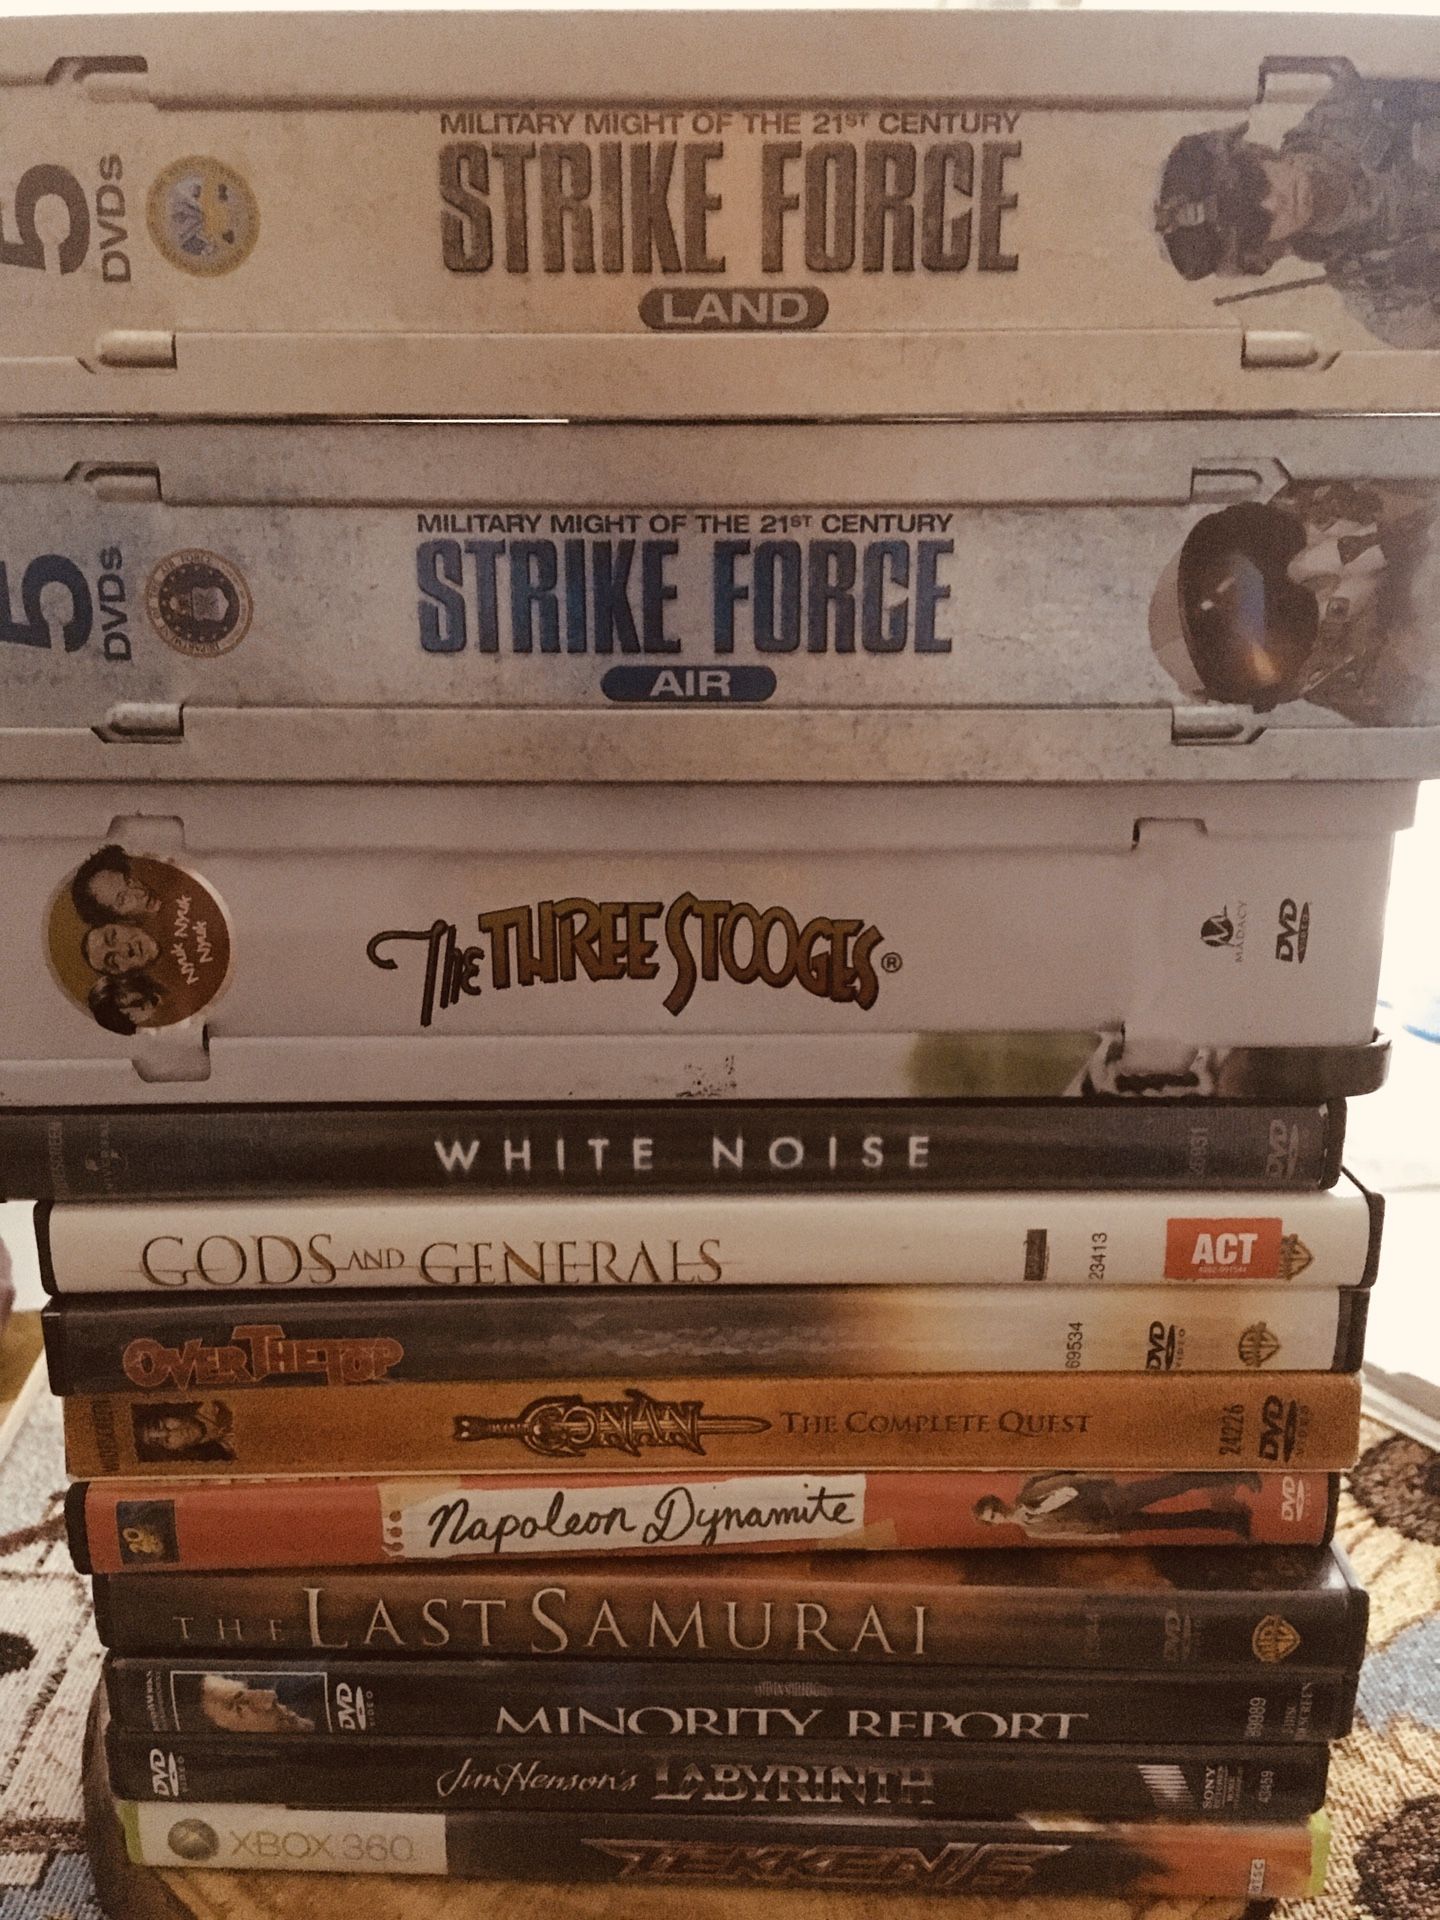 Miscellaneous movies